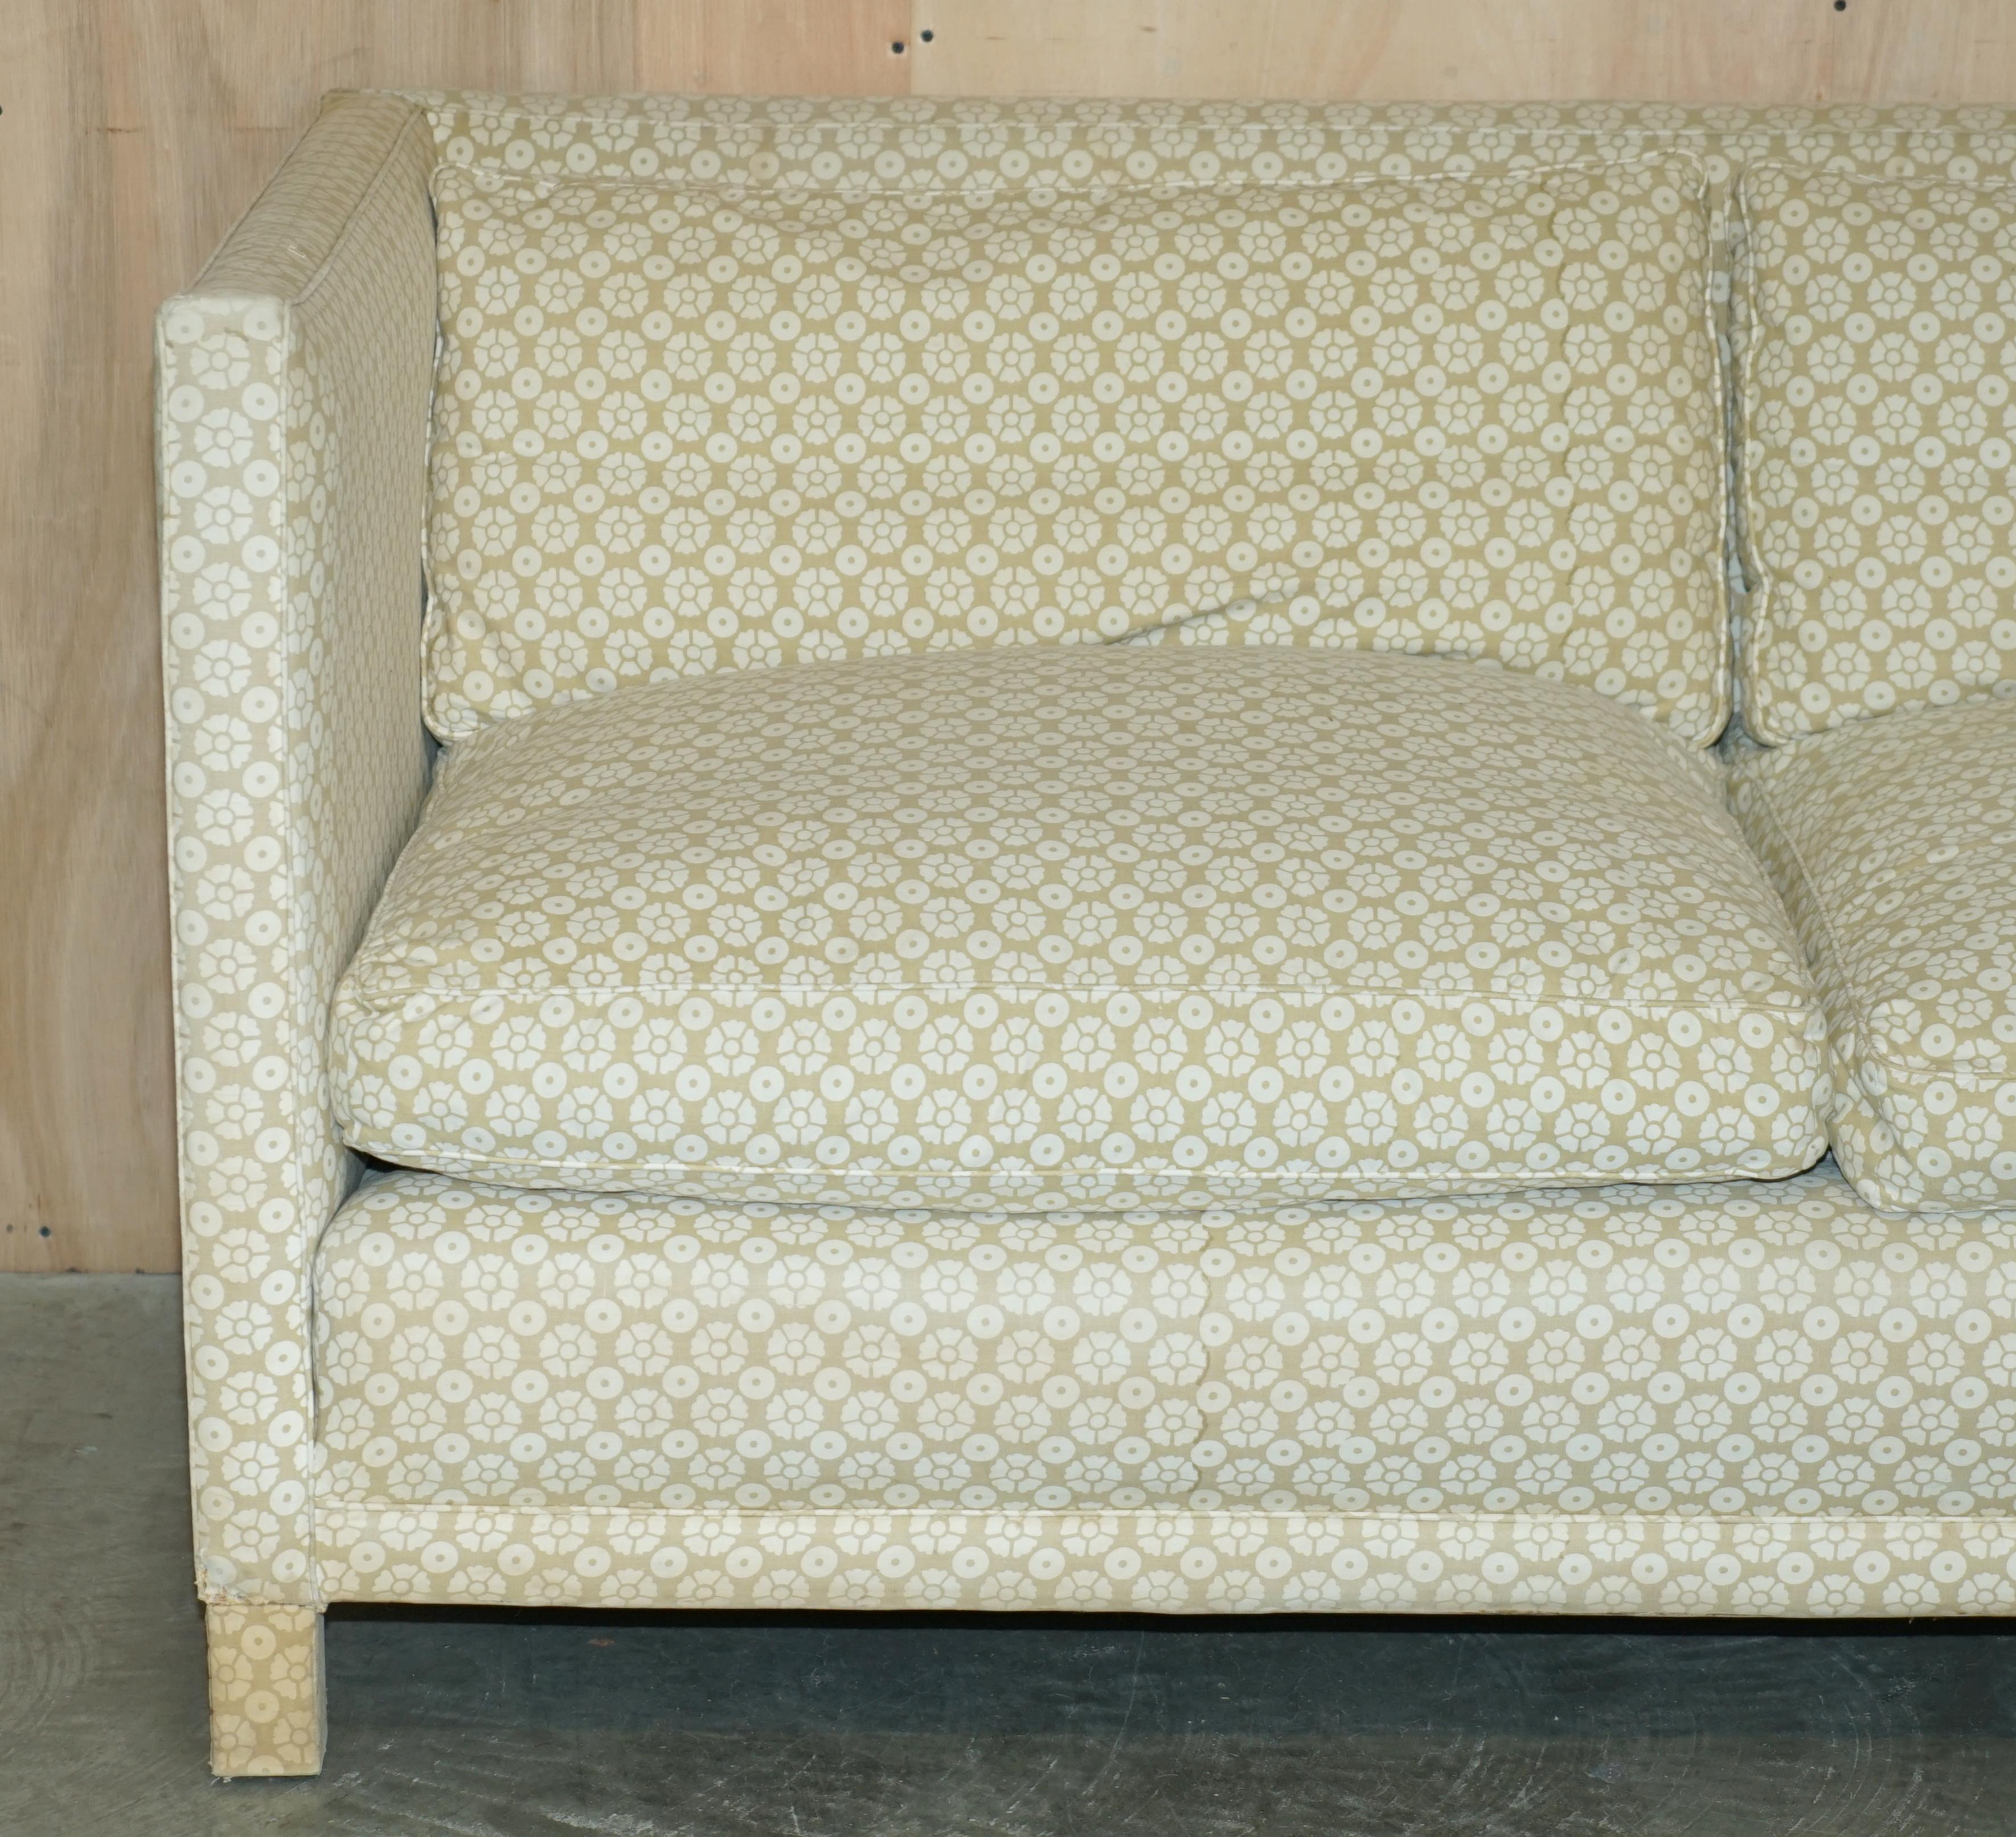 Country 1 OF 2 IMPORTANT CiRCA 1969 DAVID HICKS SOFAS IN THE ORIGINAL TICKING FABRIc For Sale